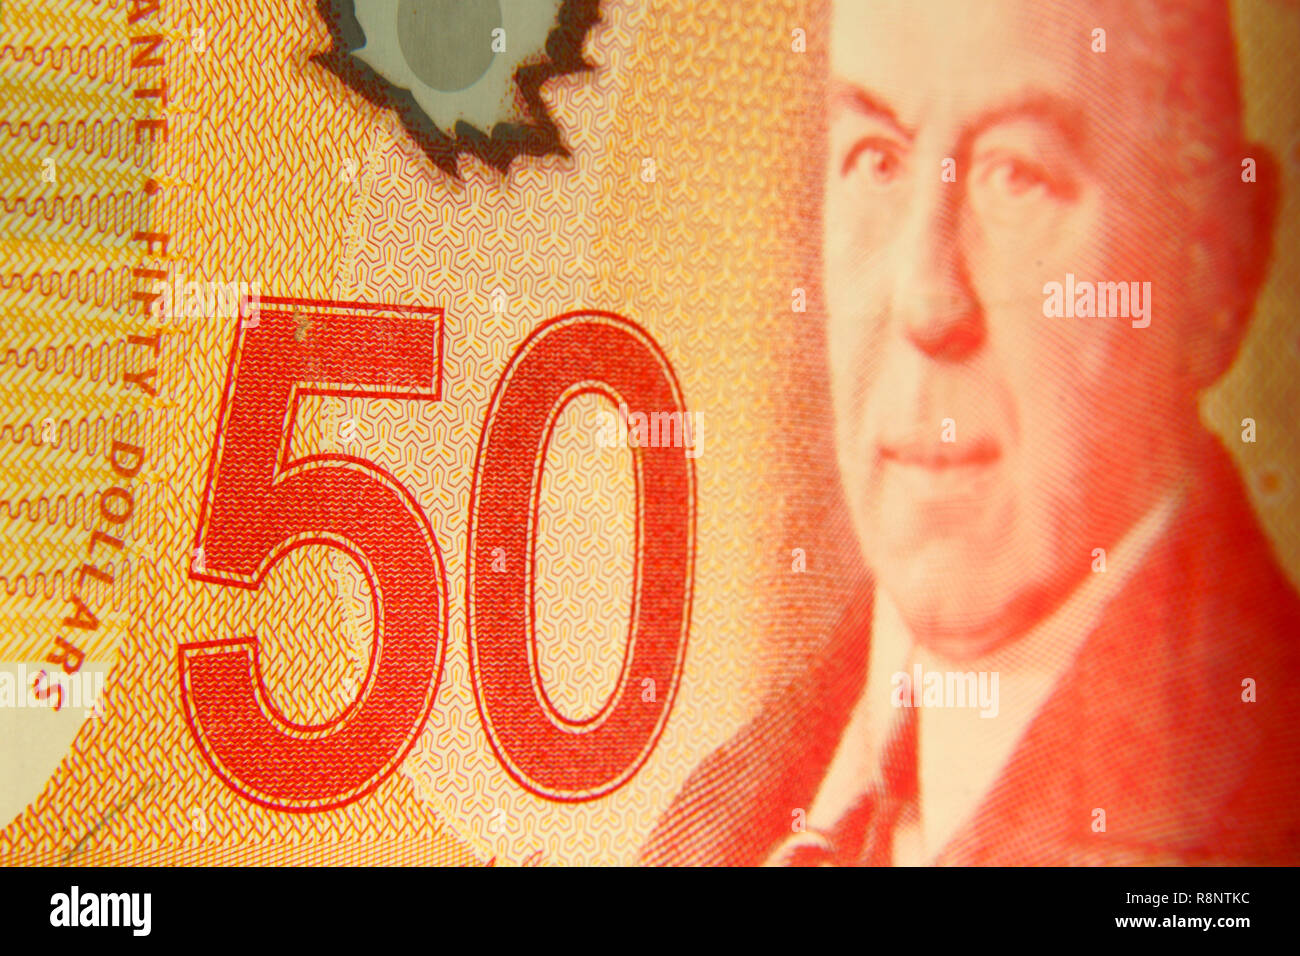 Close up of a fifty canadian dollar bill with the portrait of W.L. Mackenzie King, Prime Minister of Canada from 1921 to 1930 and from 1935 to 1948. Stock Photo